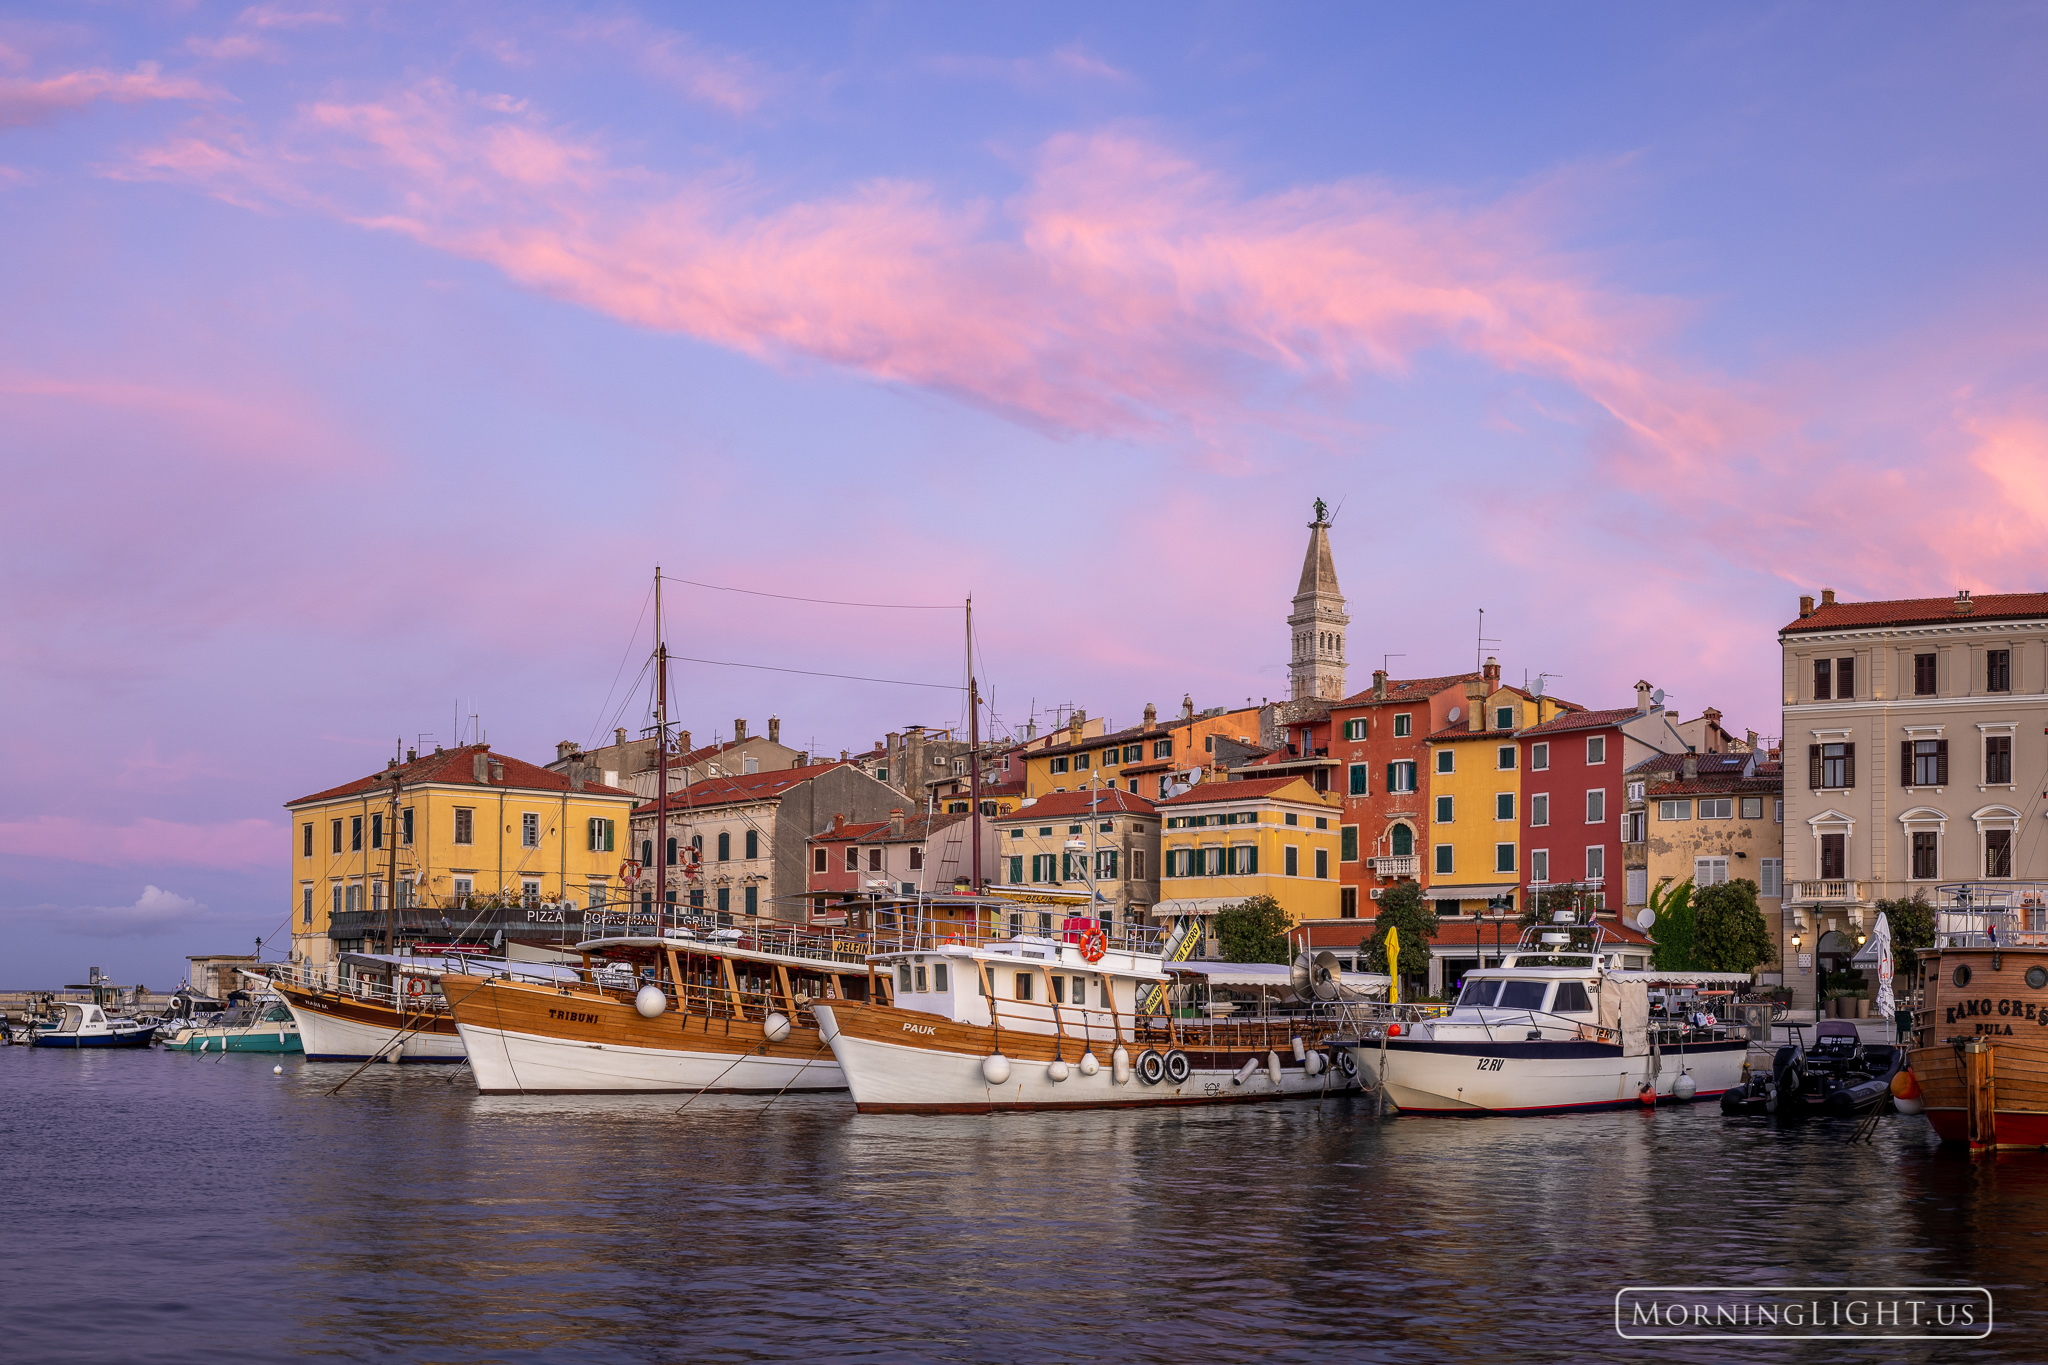 As the day began, the clouds above the little port town of Rovijn, Croatia began to glow.